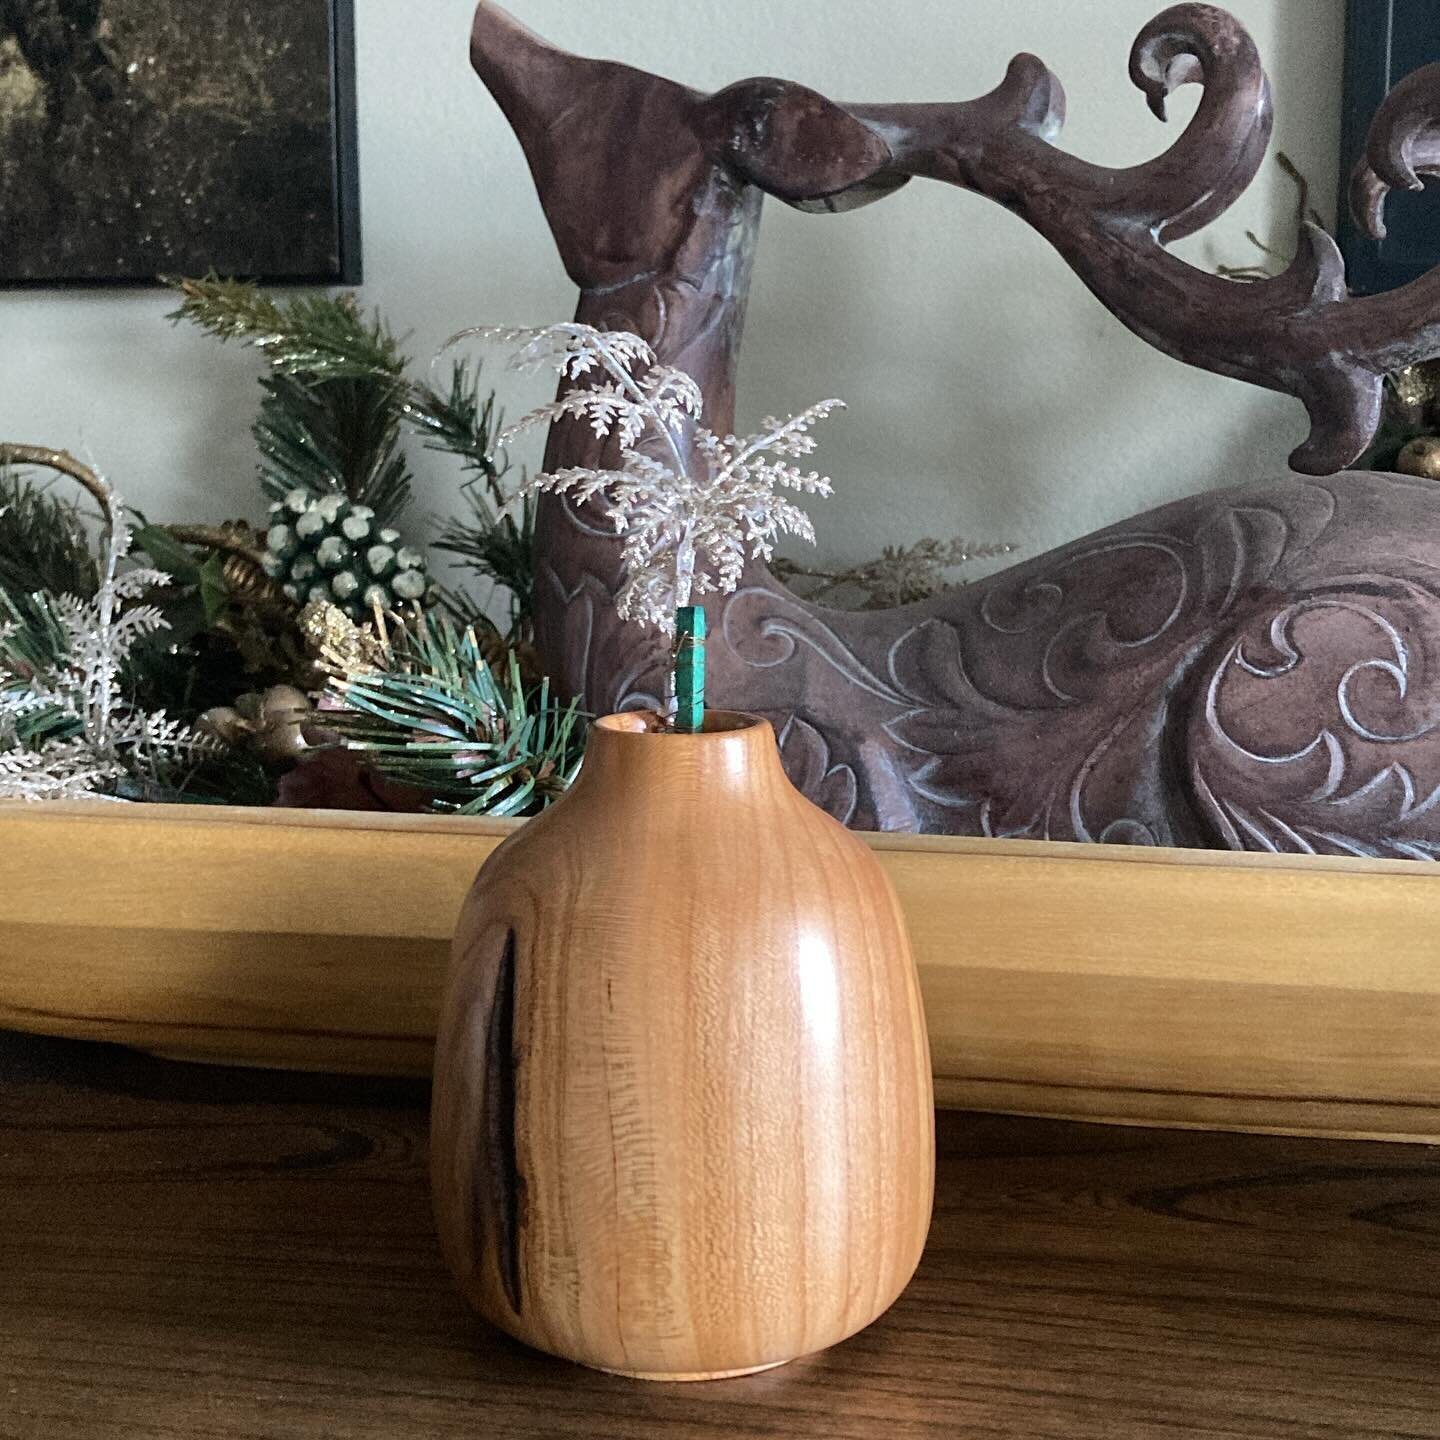 A little Stick Vase in what I think is Apricot wood. 

#wispwoods #merrychristmas #happywife